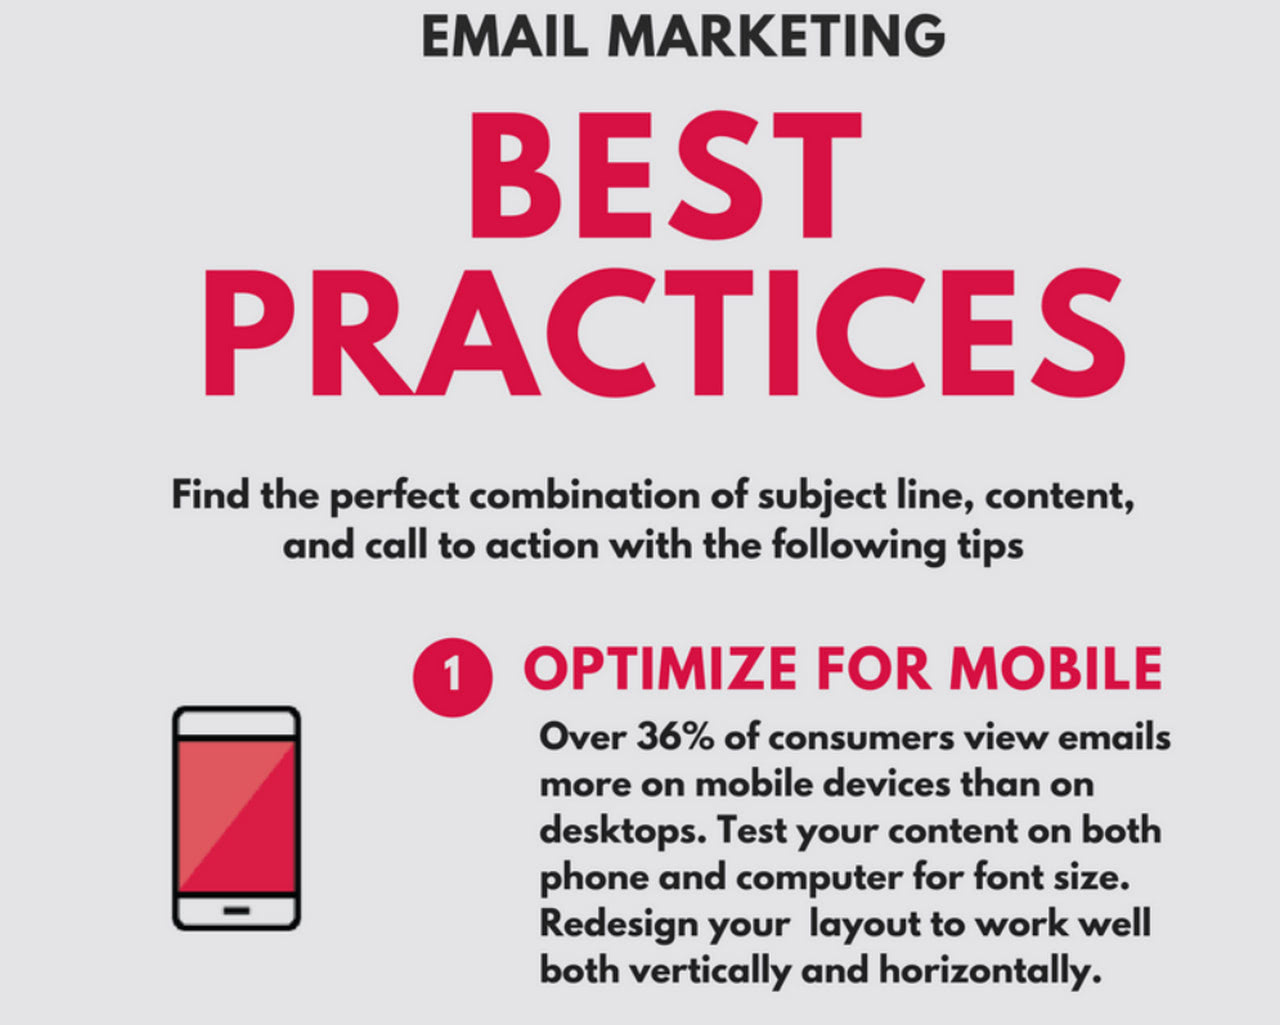 Snippet from "Email Marketing Best Practices" infographic by Coleen Eakins